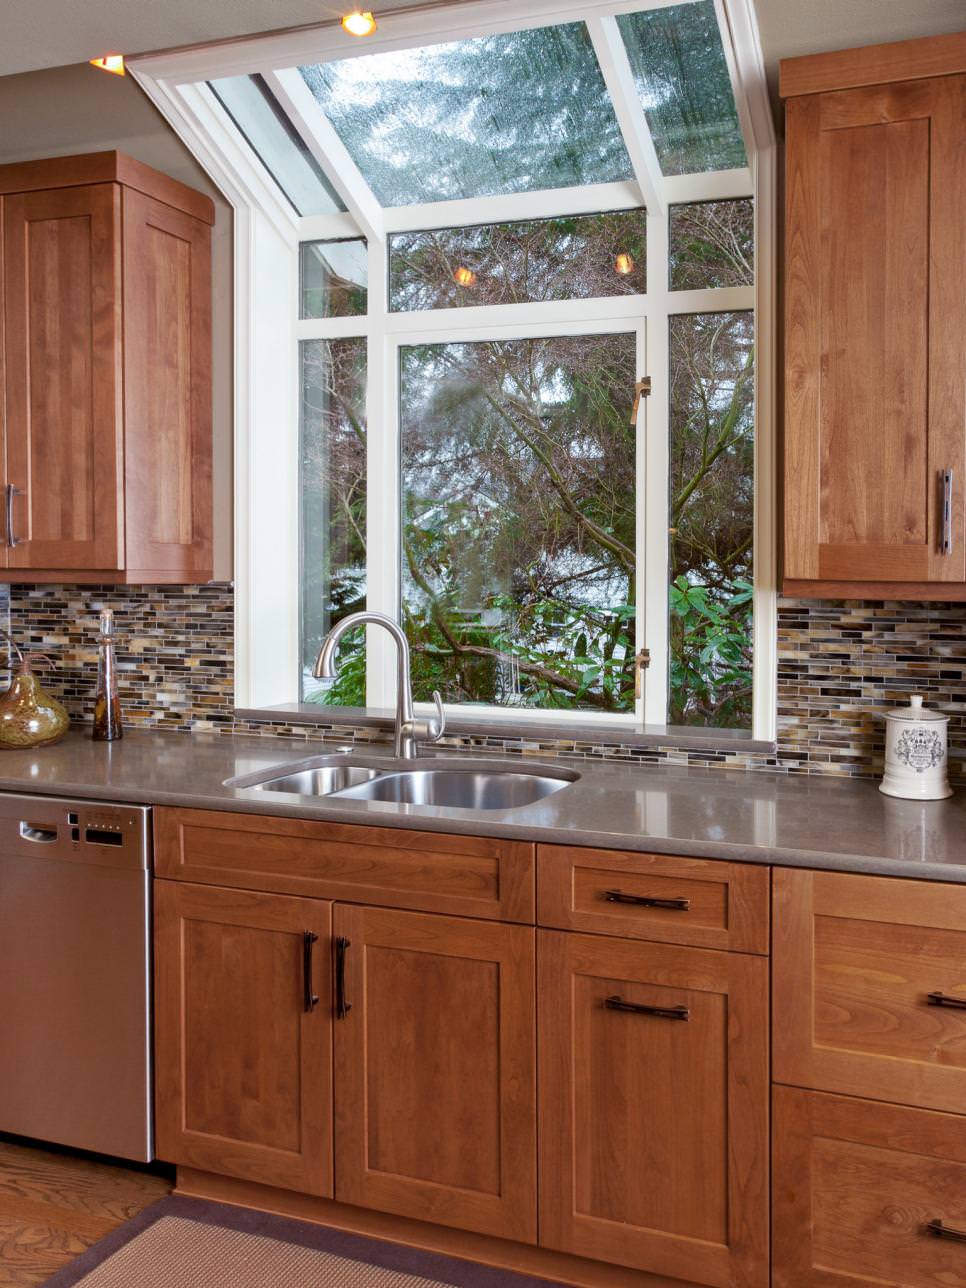 sink kitchen window over lovely hgtv windows above designs wall nordquist candace trends